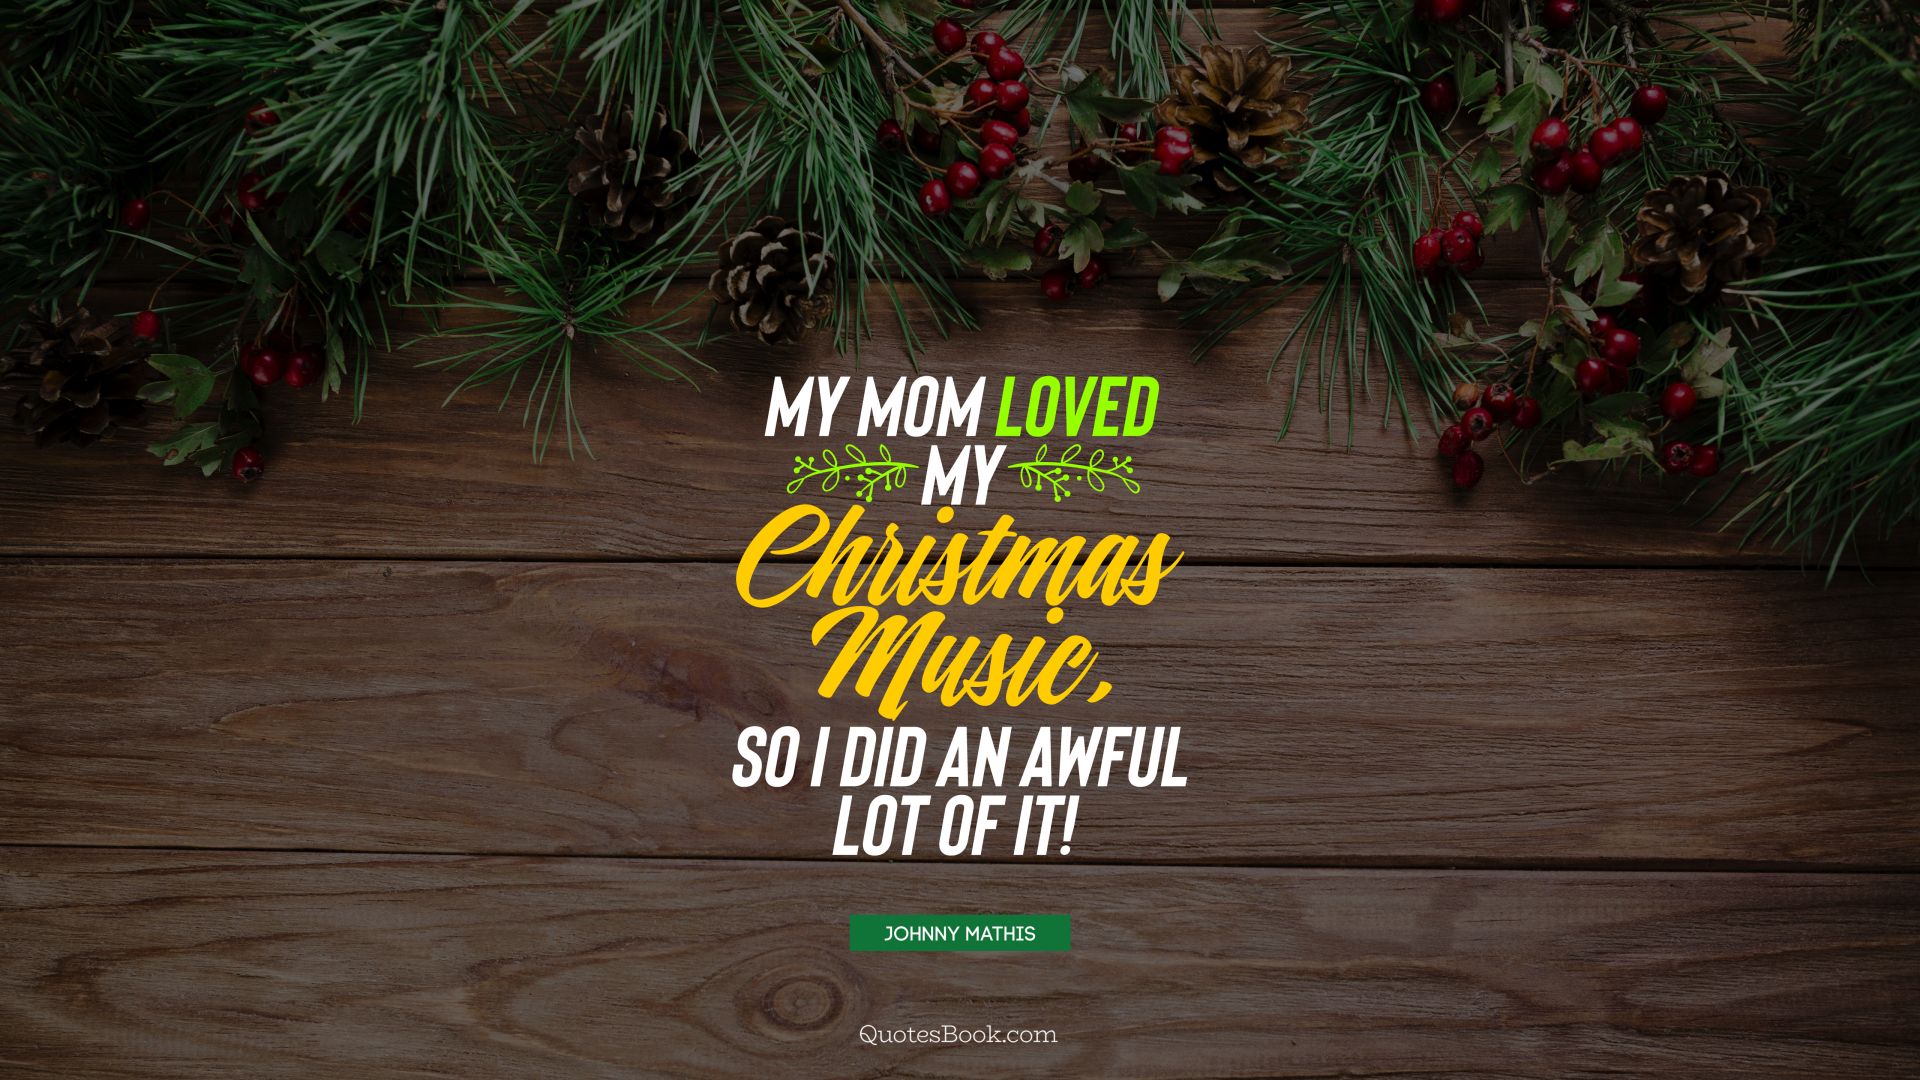 My mom loved my Christmas music, so I did an awful lot of it! . - Quote by Johnny Mathis